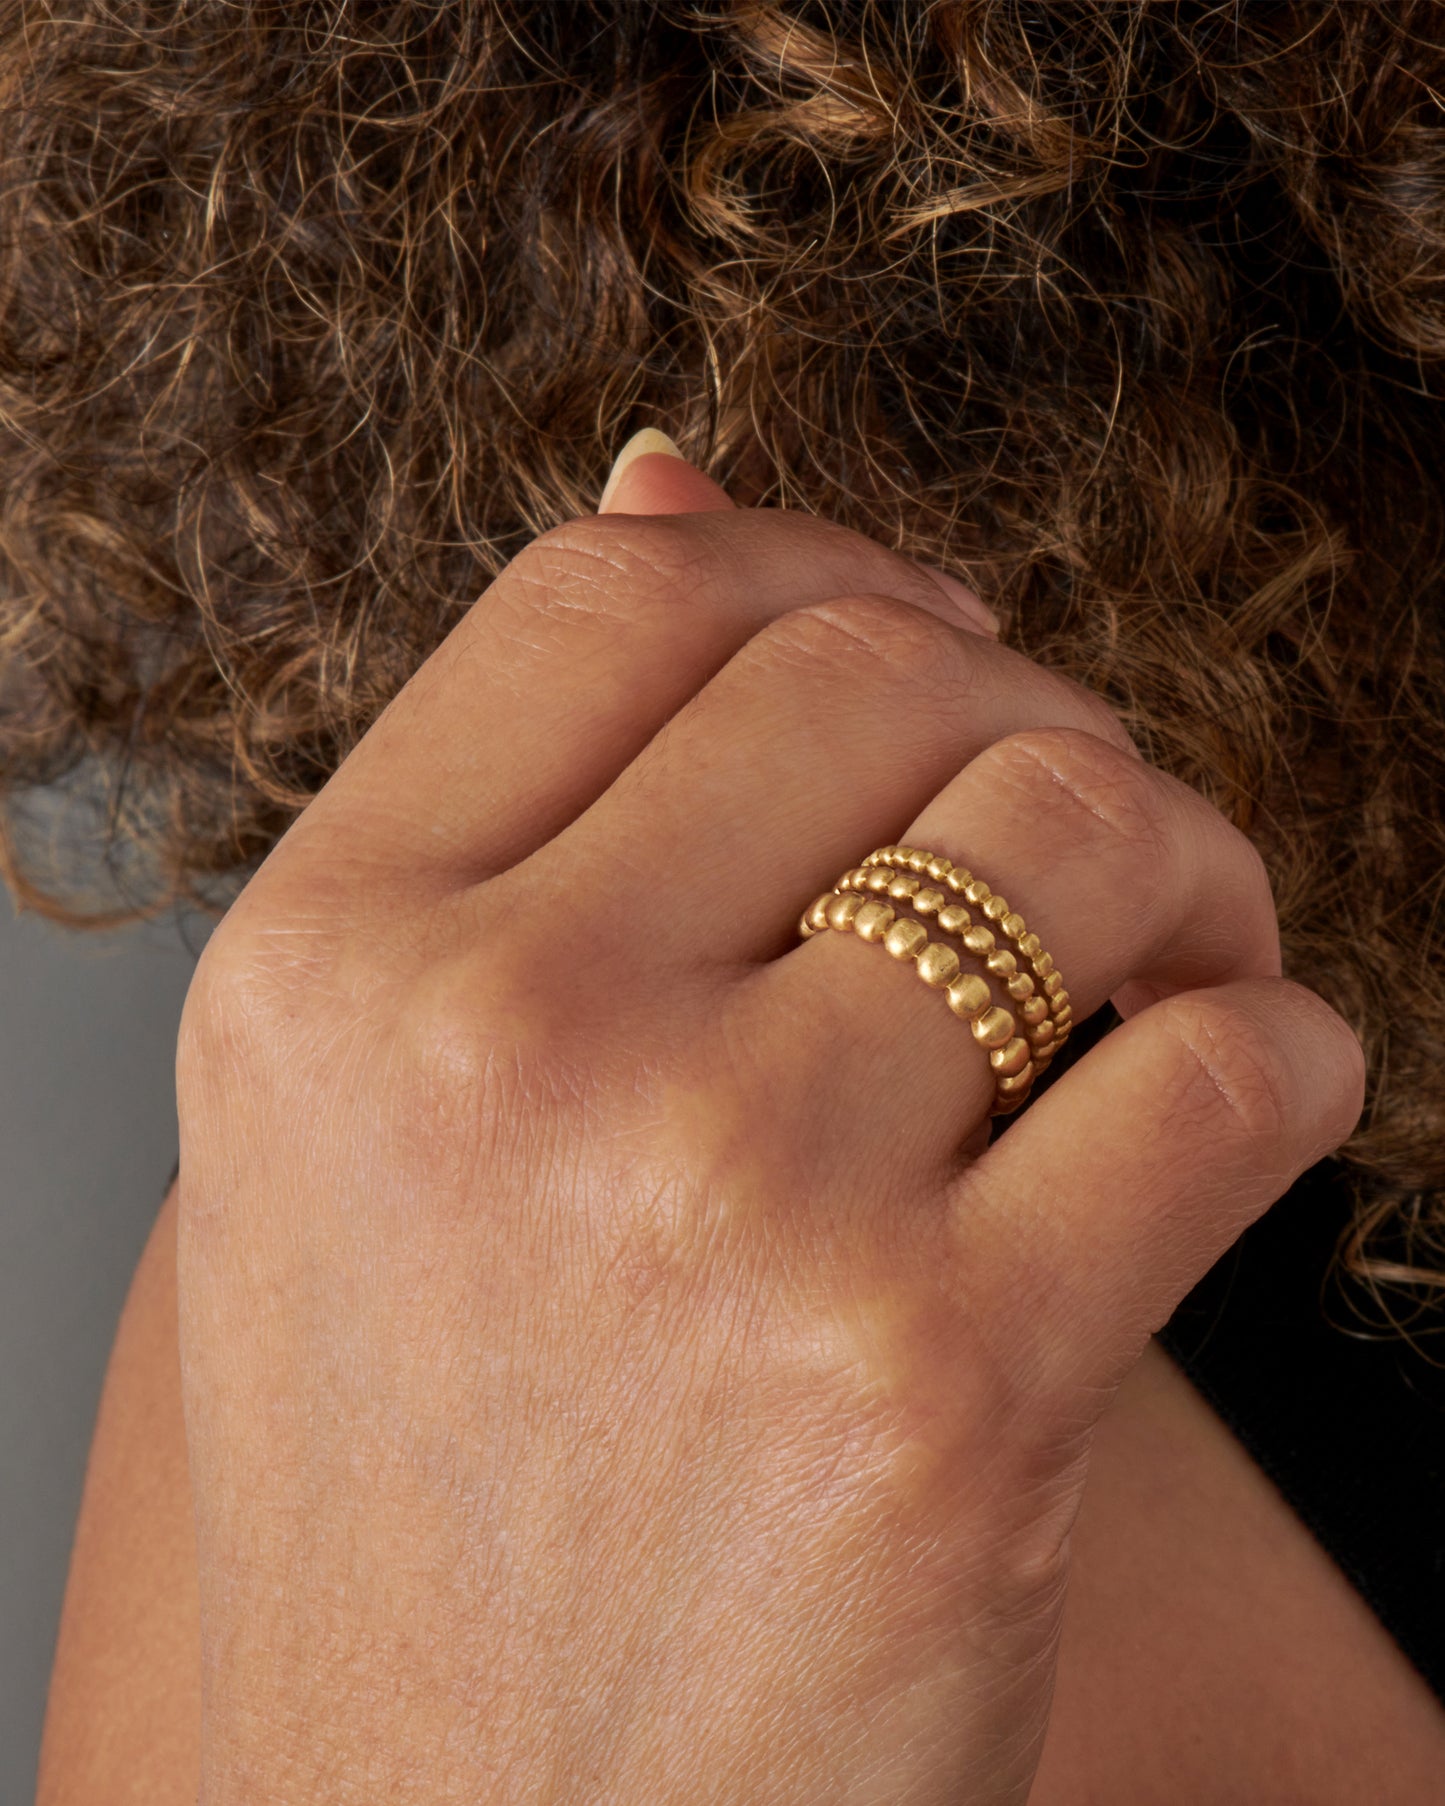 A perfect gold bubble stacking ring that adds volume and texture between your gem-heavy rings or looks great on its own